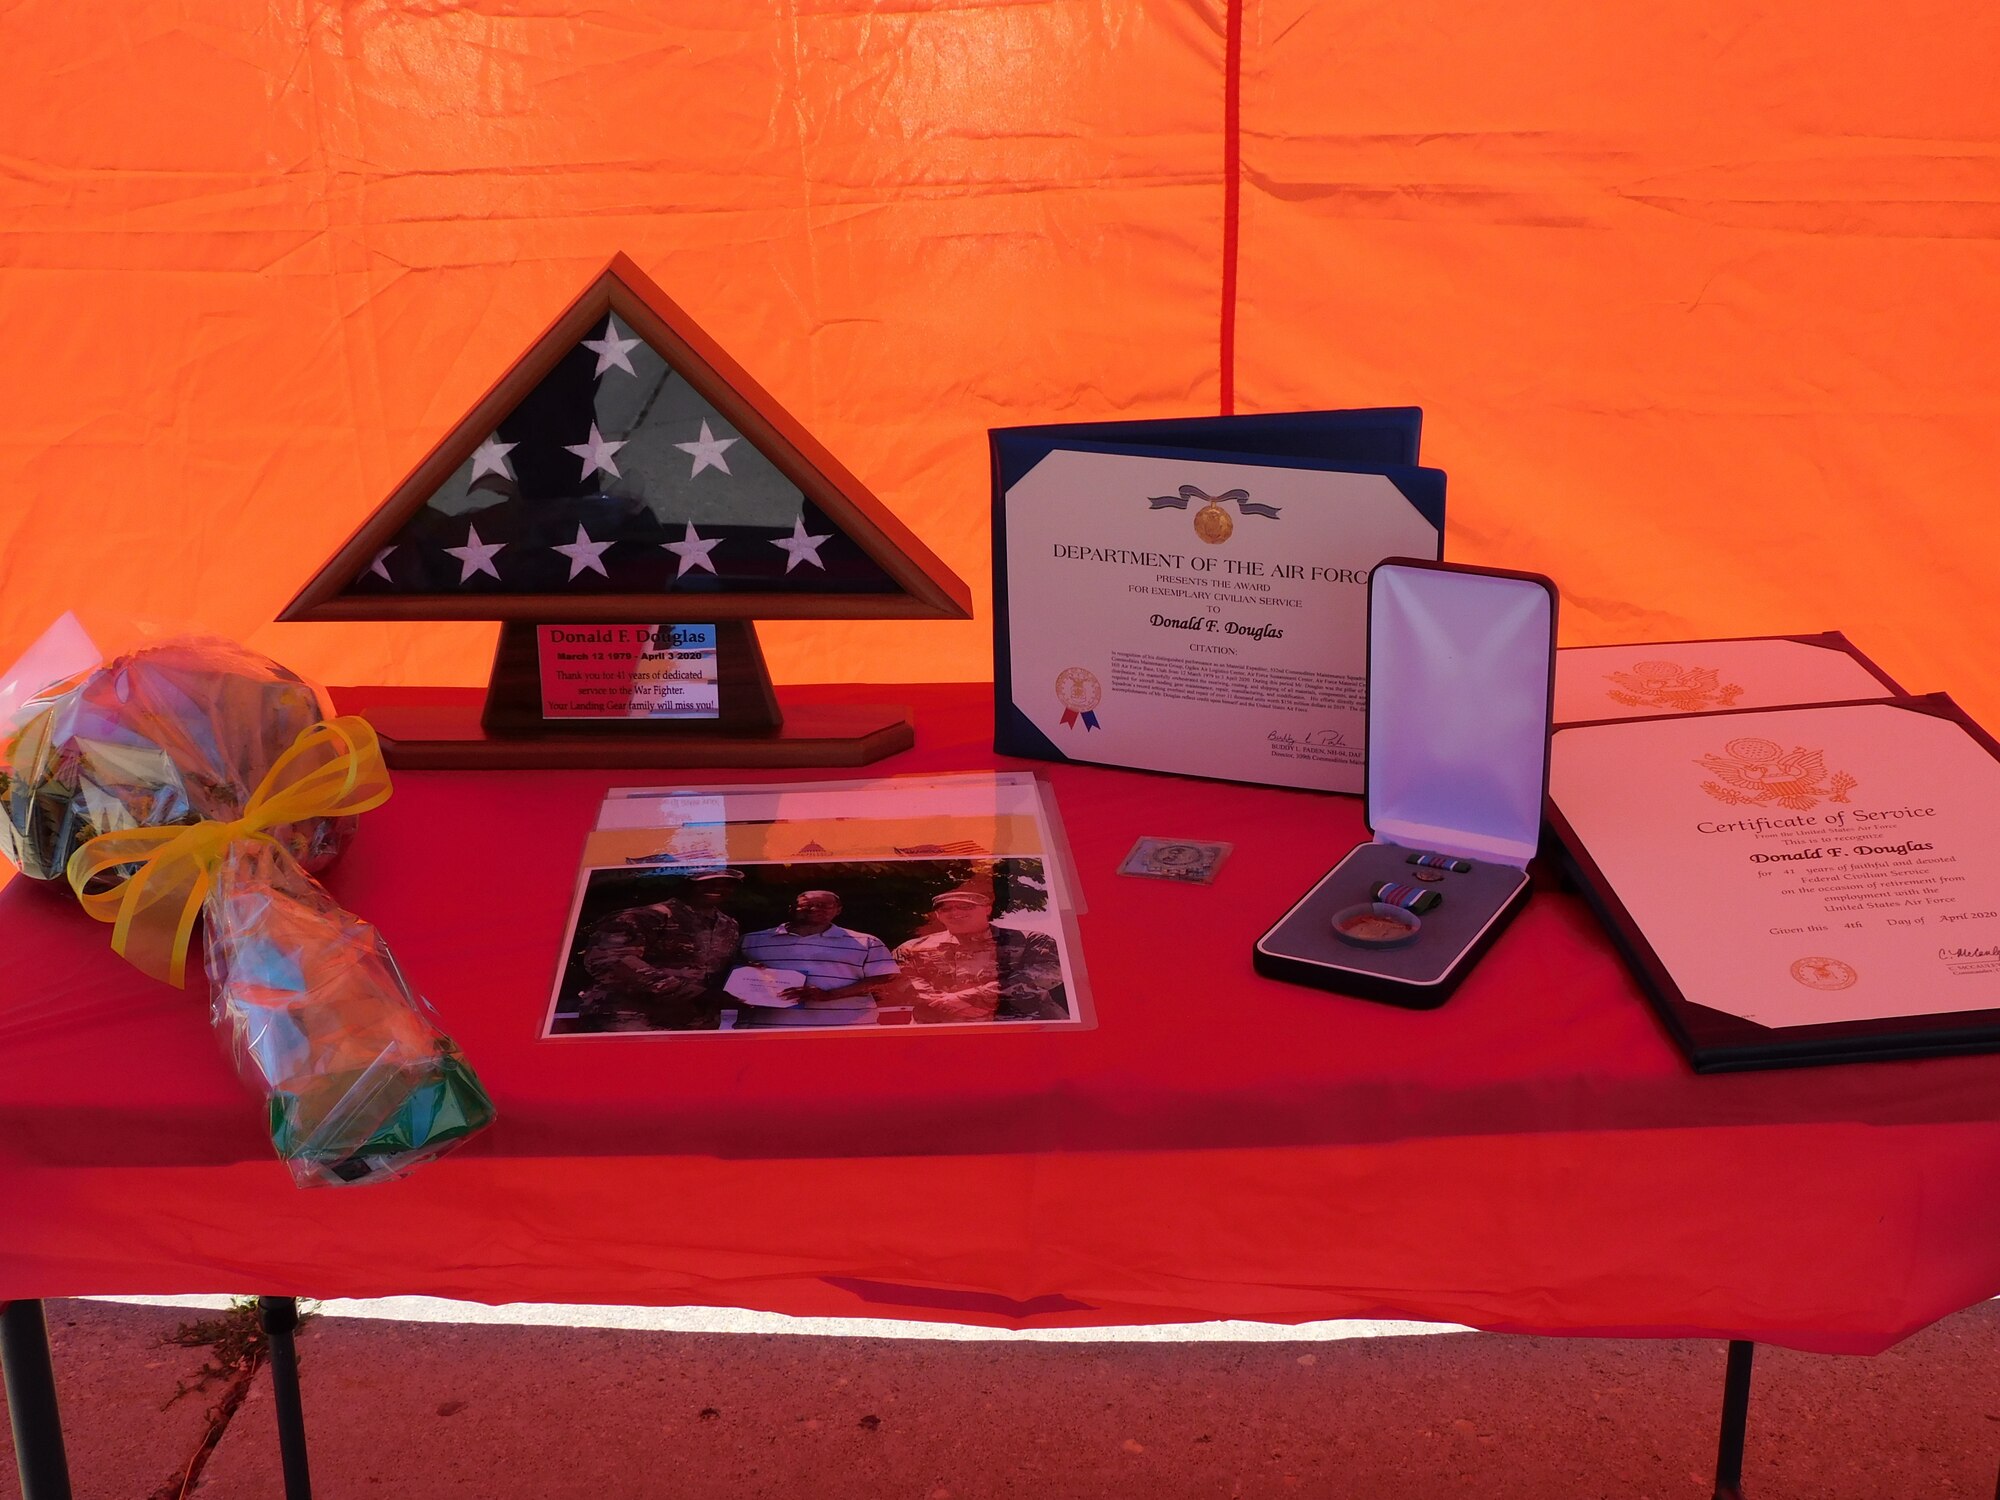 The certificates, award, flag, coin and pin presented to Donald F. Douglas sit upon a table at his retirement ceremony.